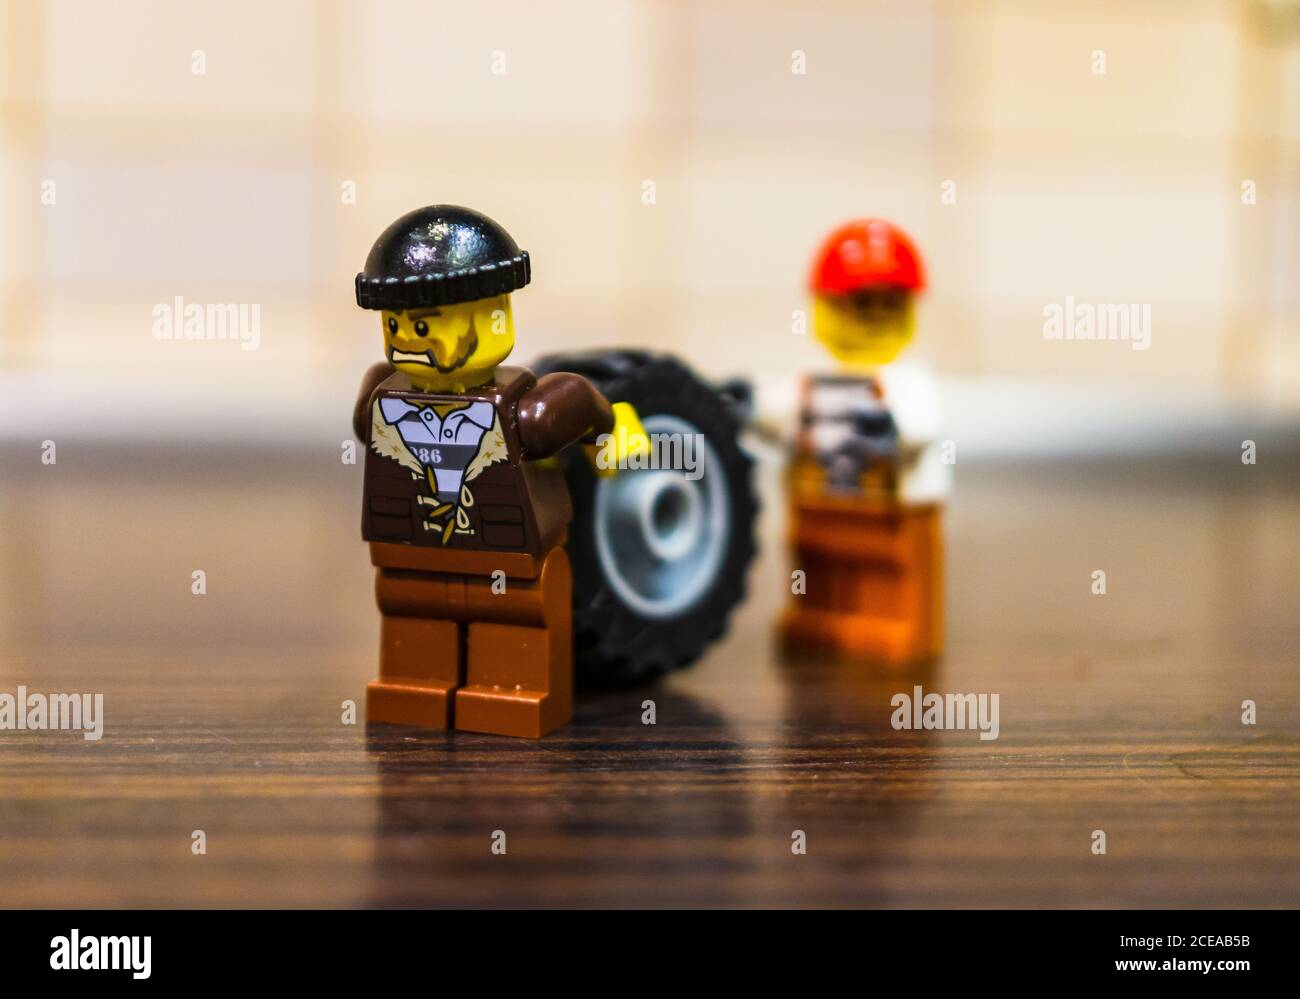 POZNAN, POLAND - Dec 18, 2018: Two Lego thieves figurines moving a car wheel in soft focus back Stock Photo